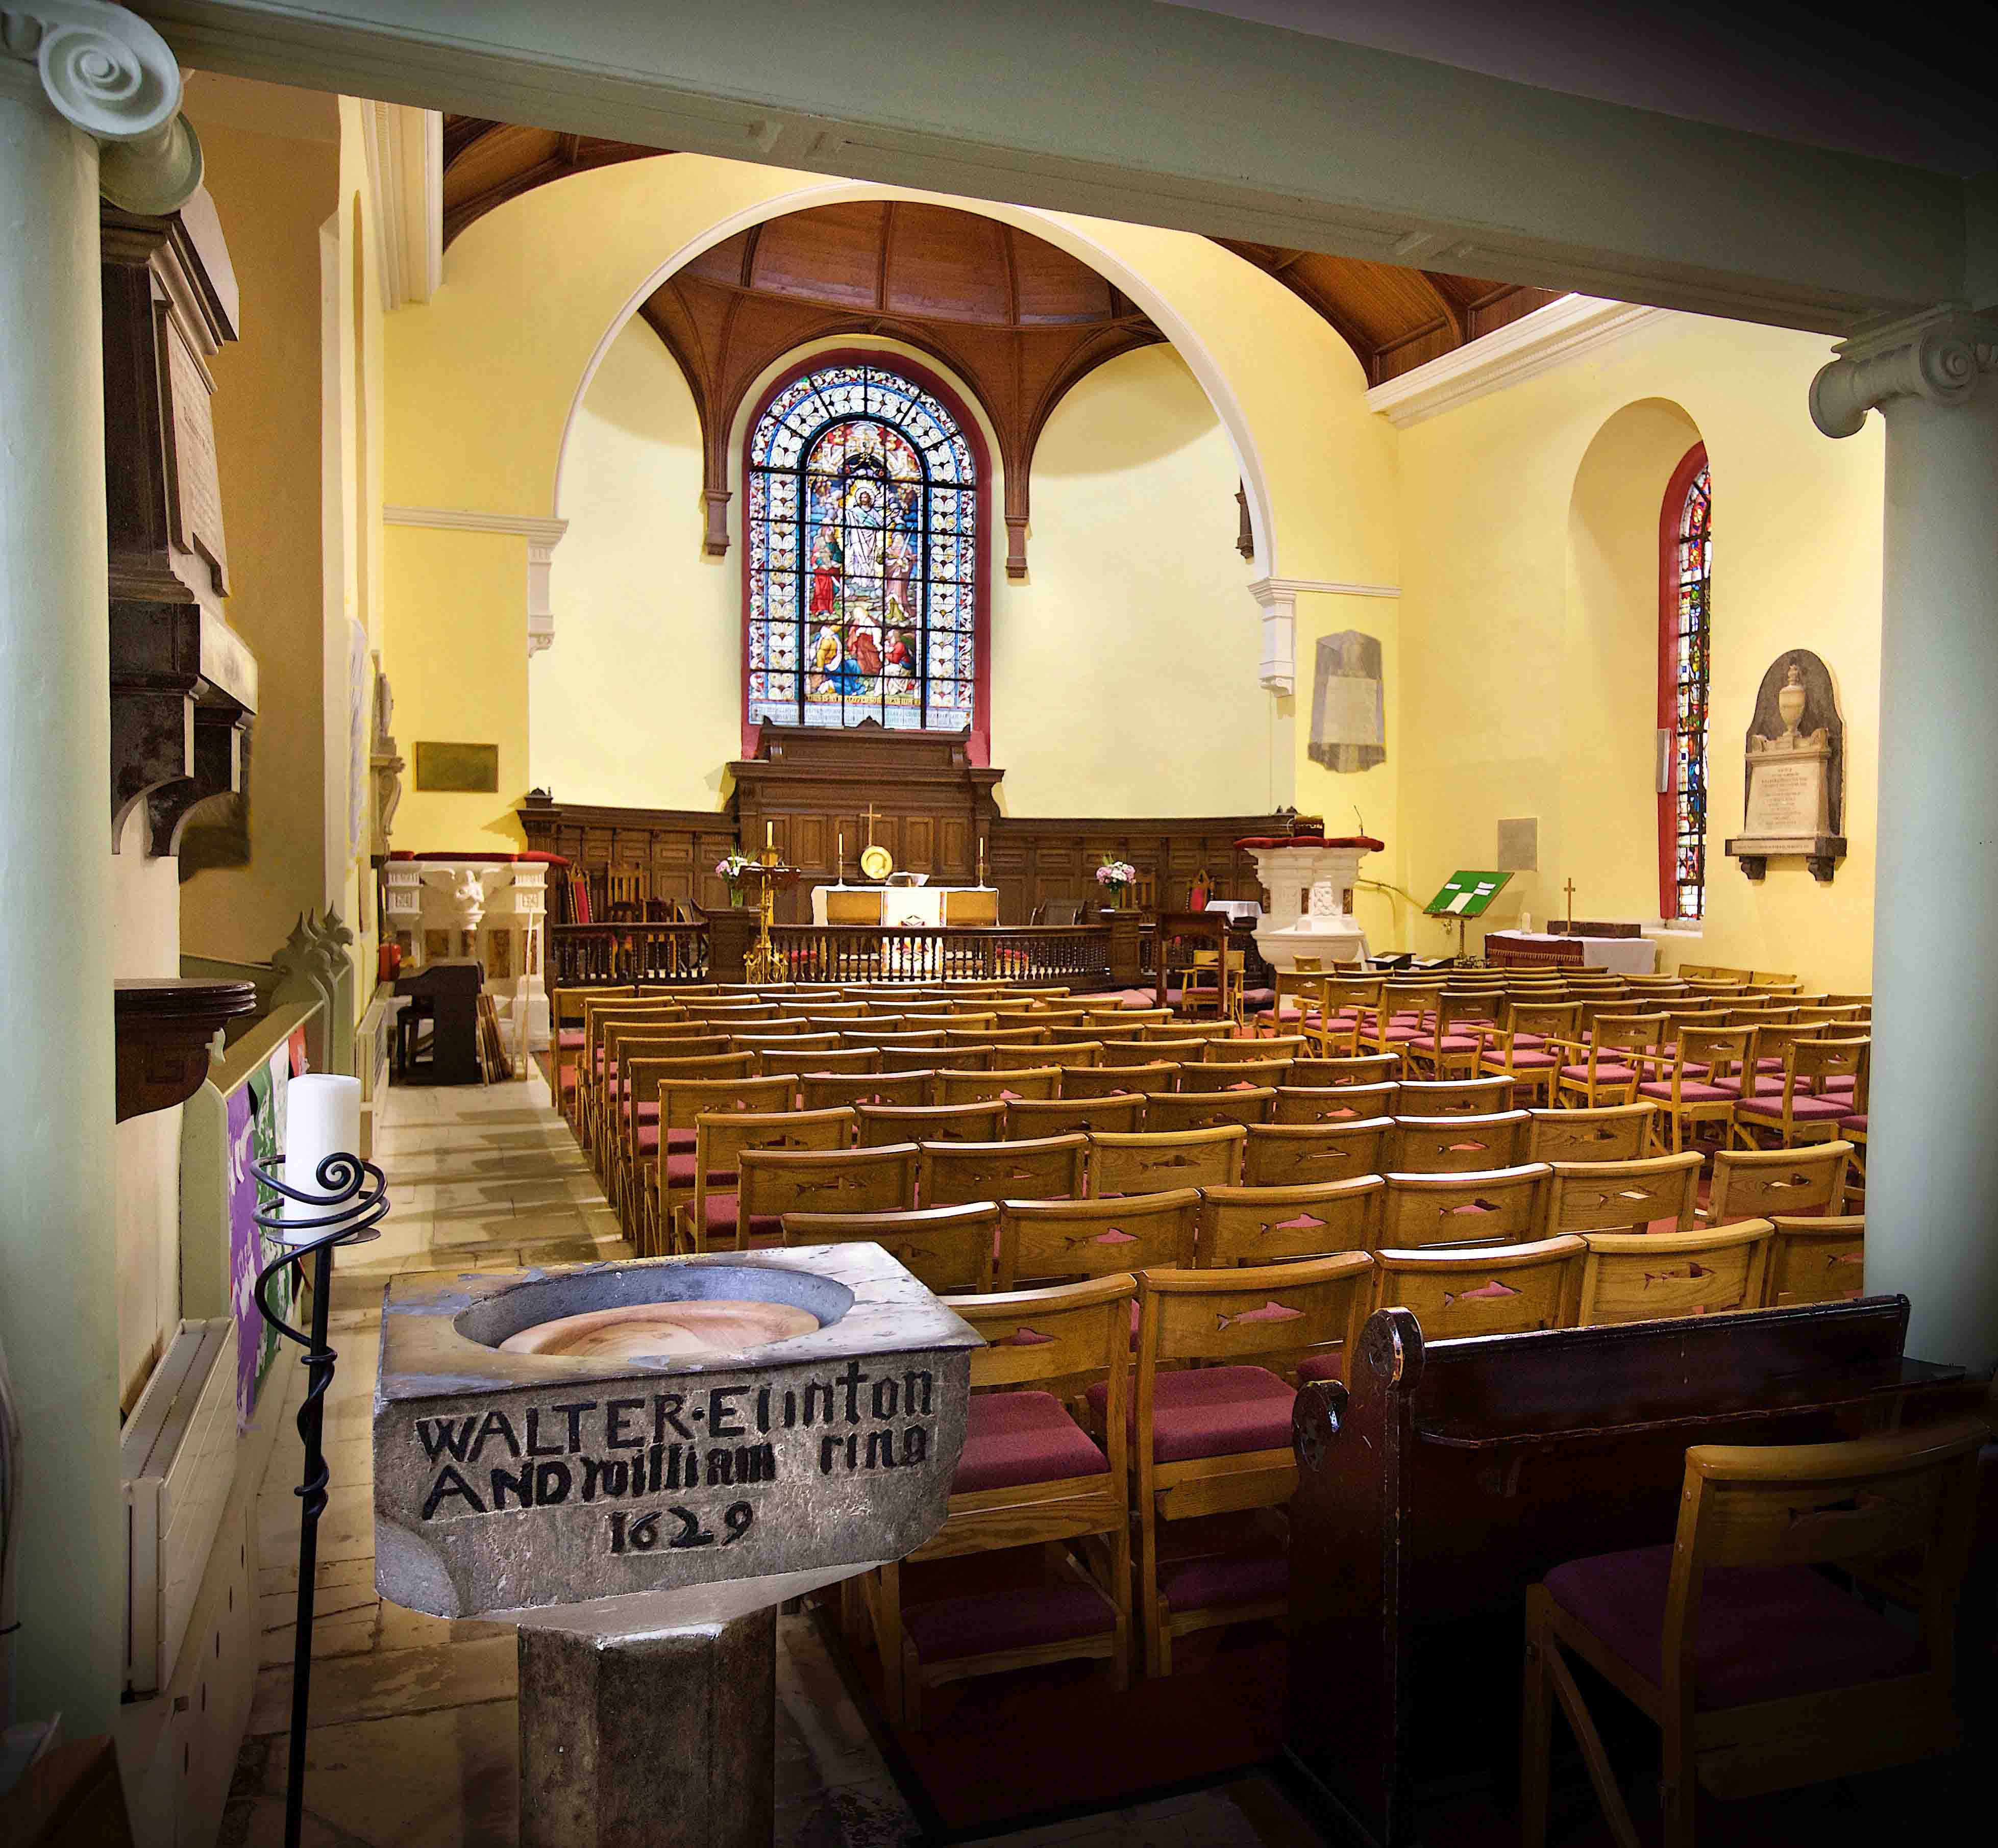 The interior of St Anne's Church in Shandon, with the original baptismal font from 1629 in the foreground. Photo: Michael Foley.